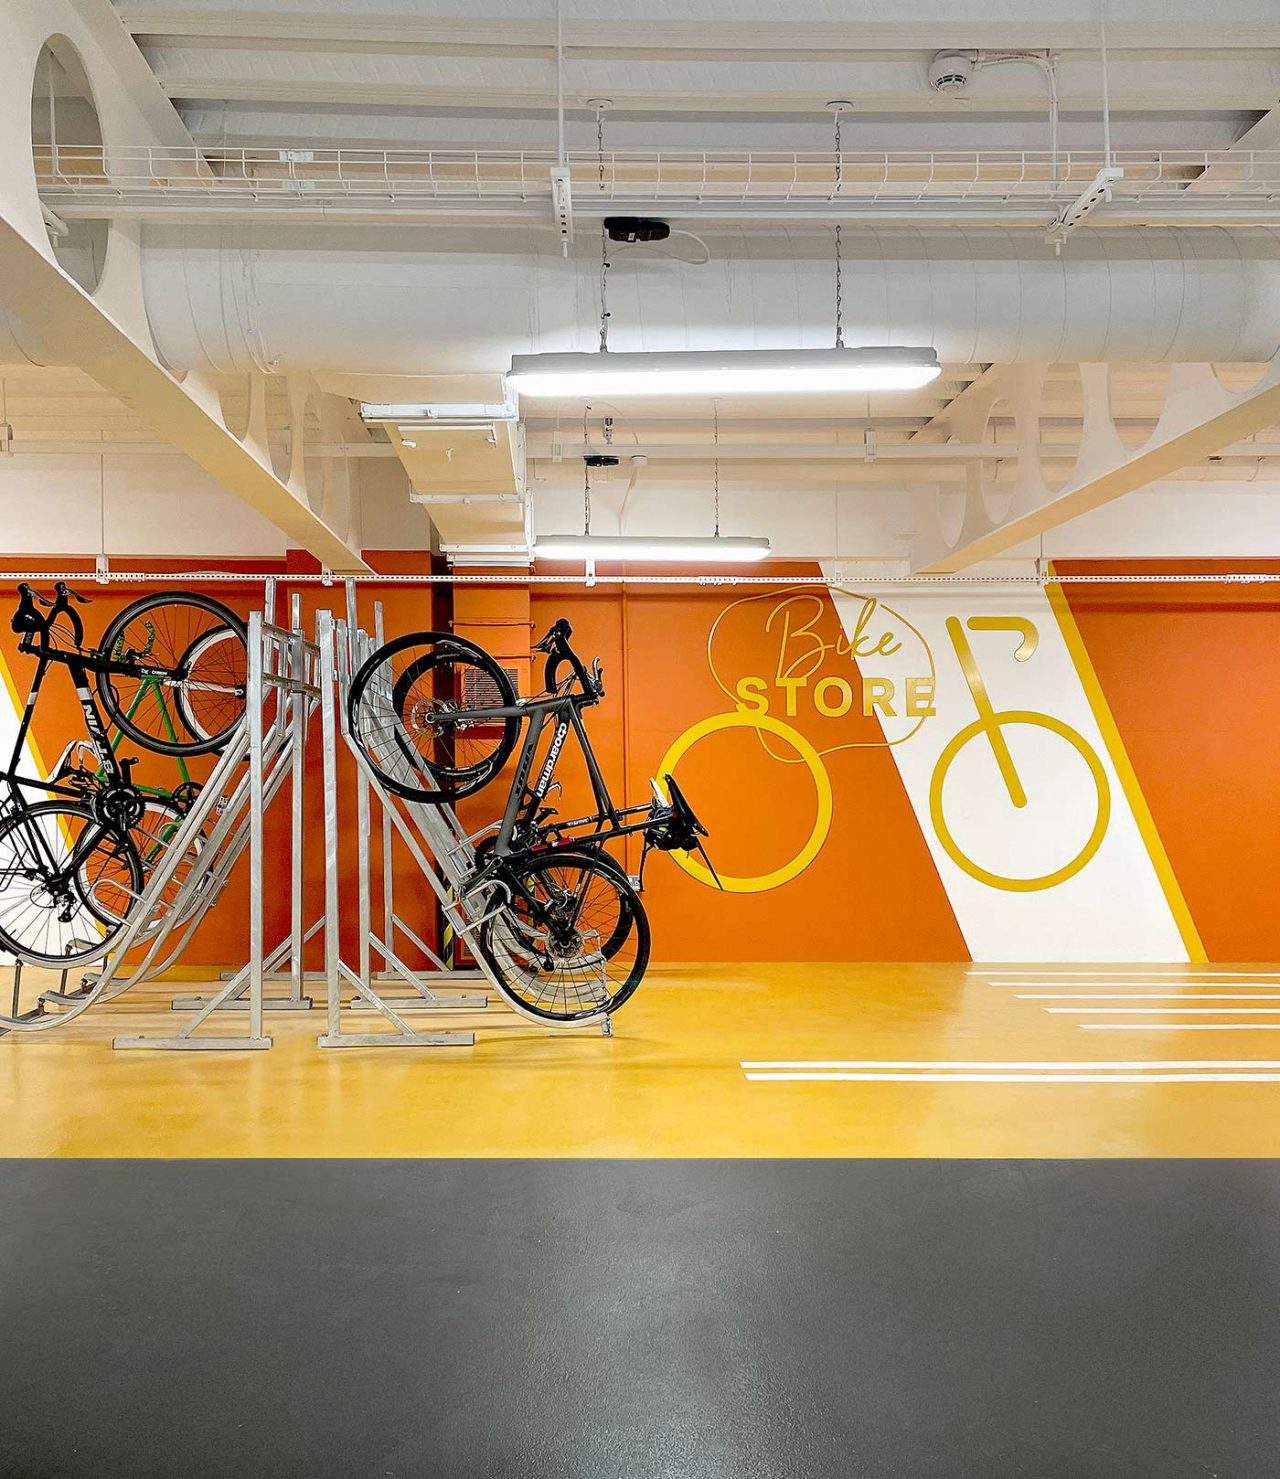 Cycle graphic on orange back wall and bikes stored in foreground